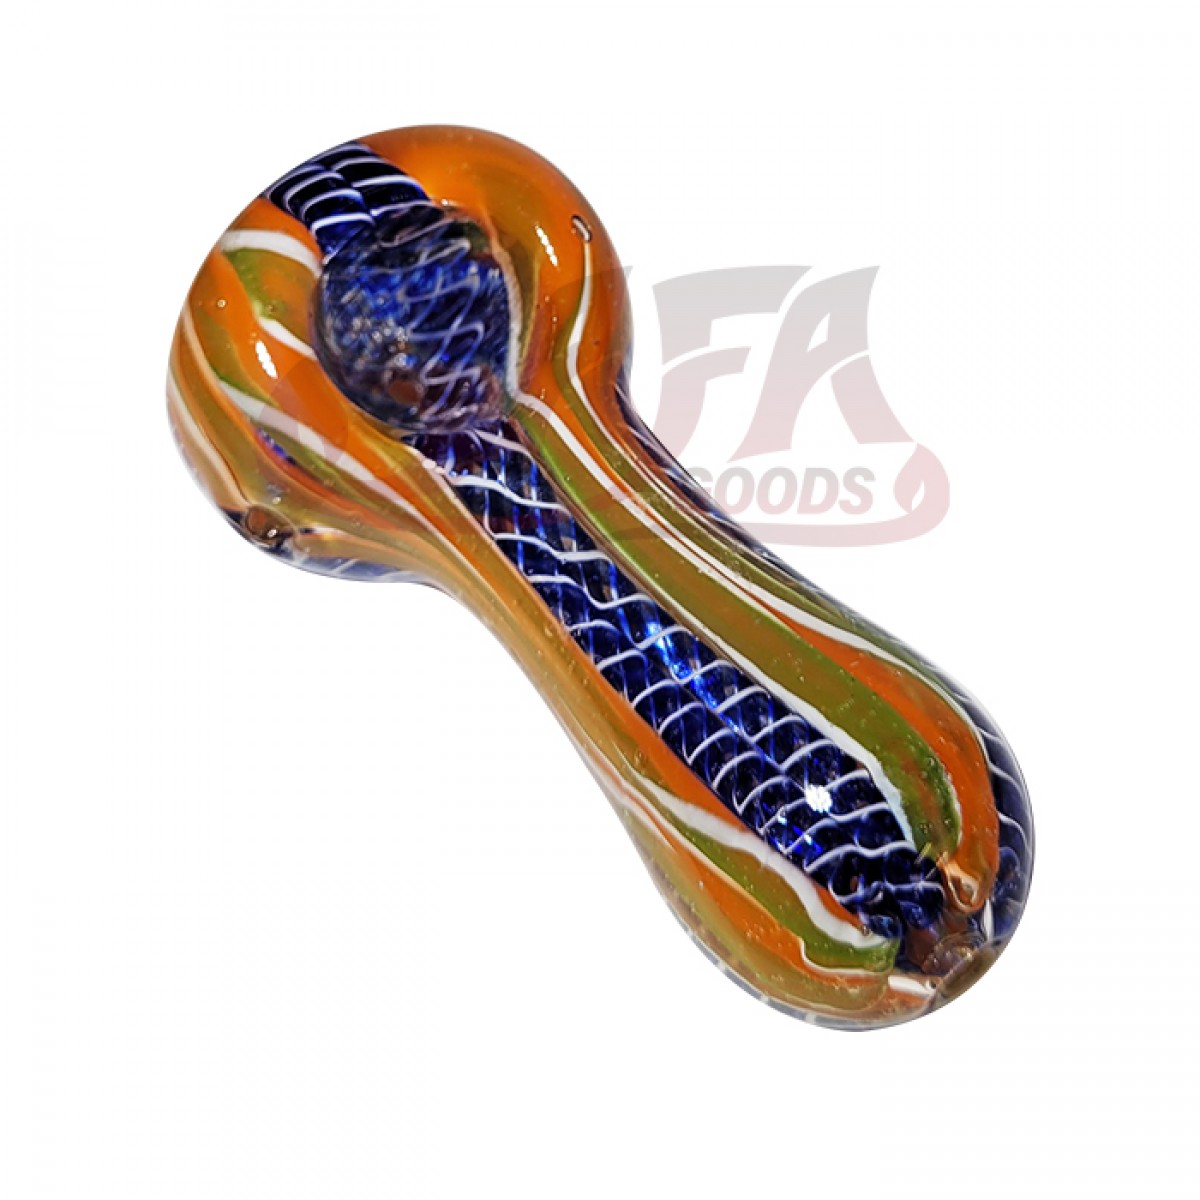 3.5" Hand Pipe w/ Straight Cane